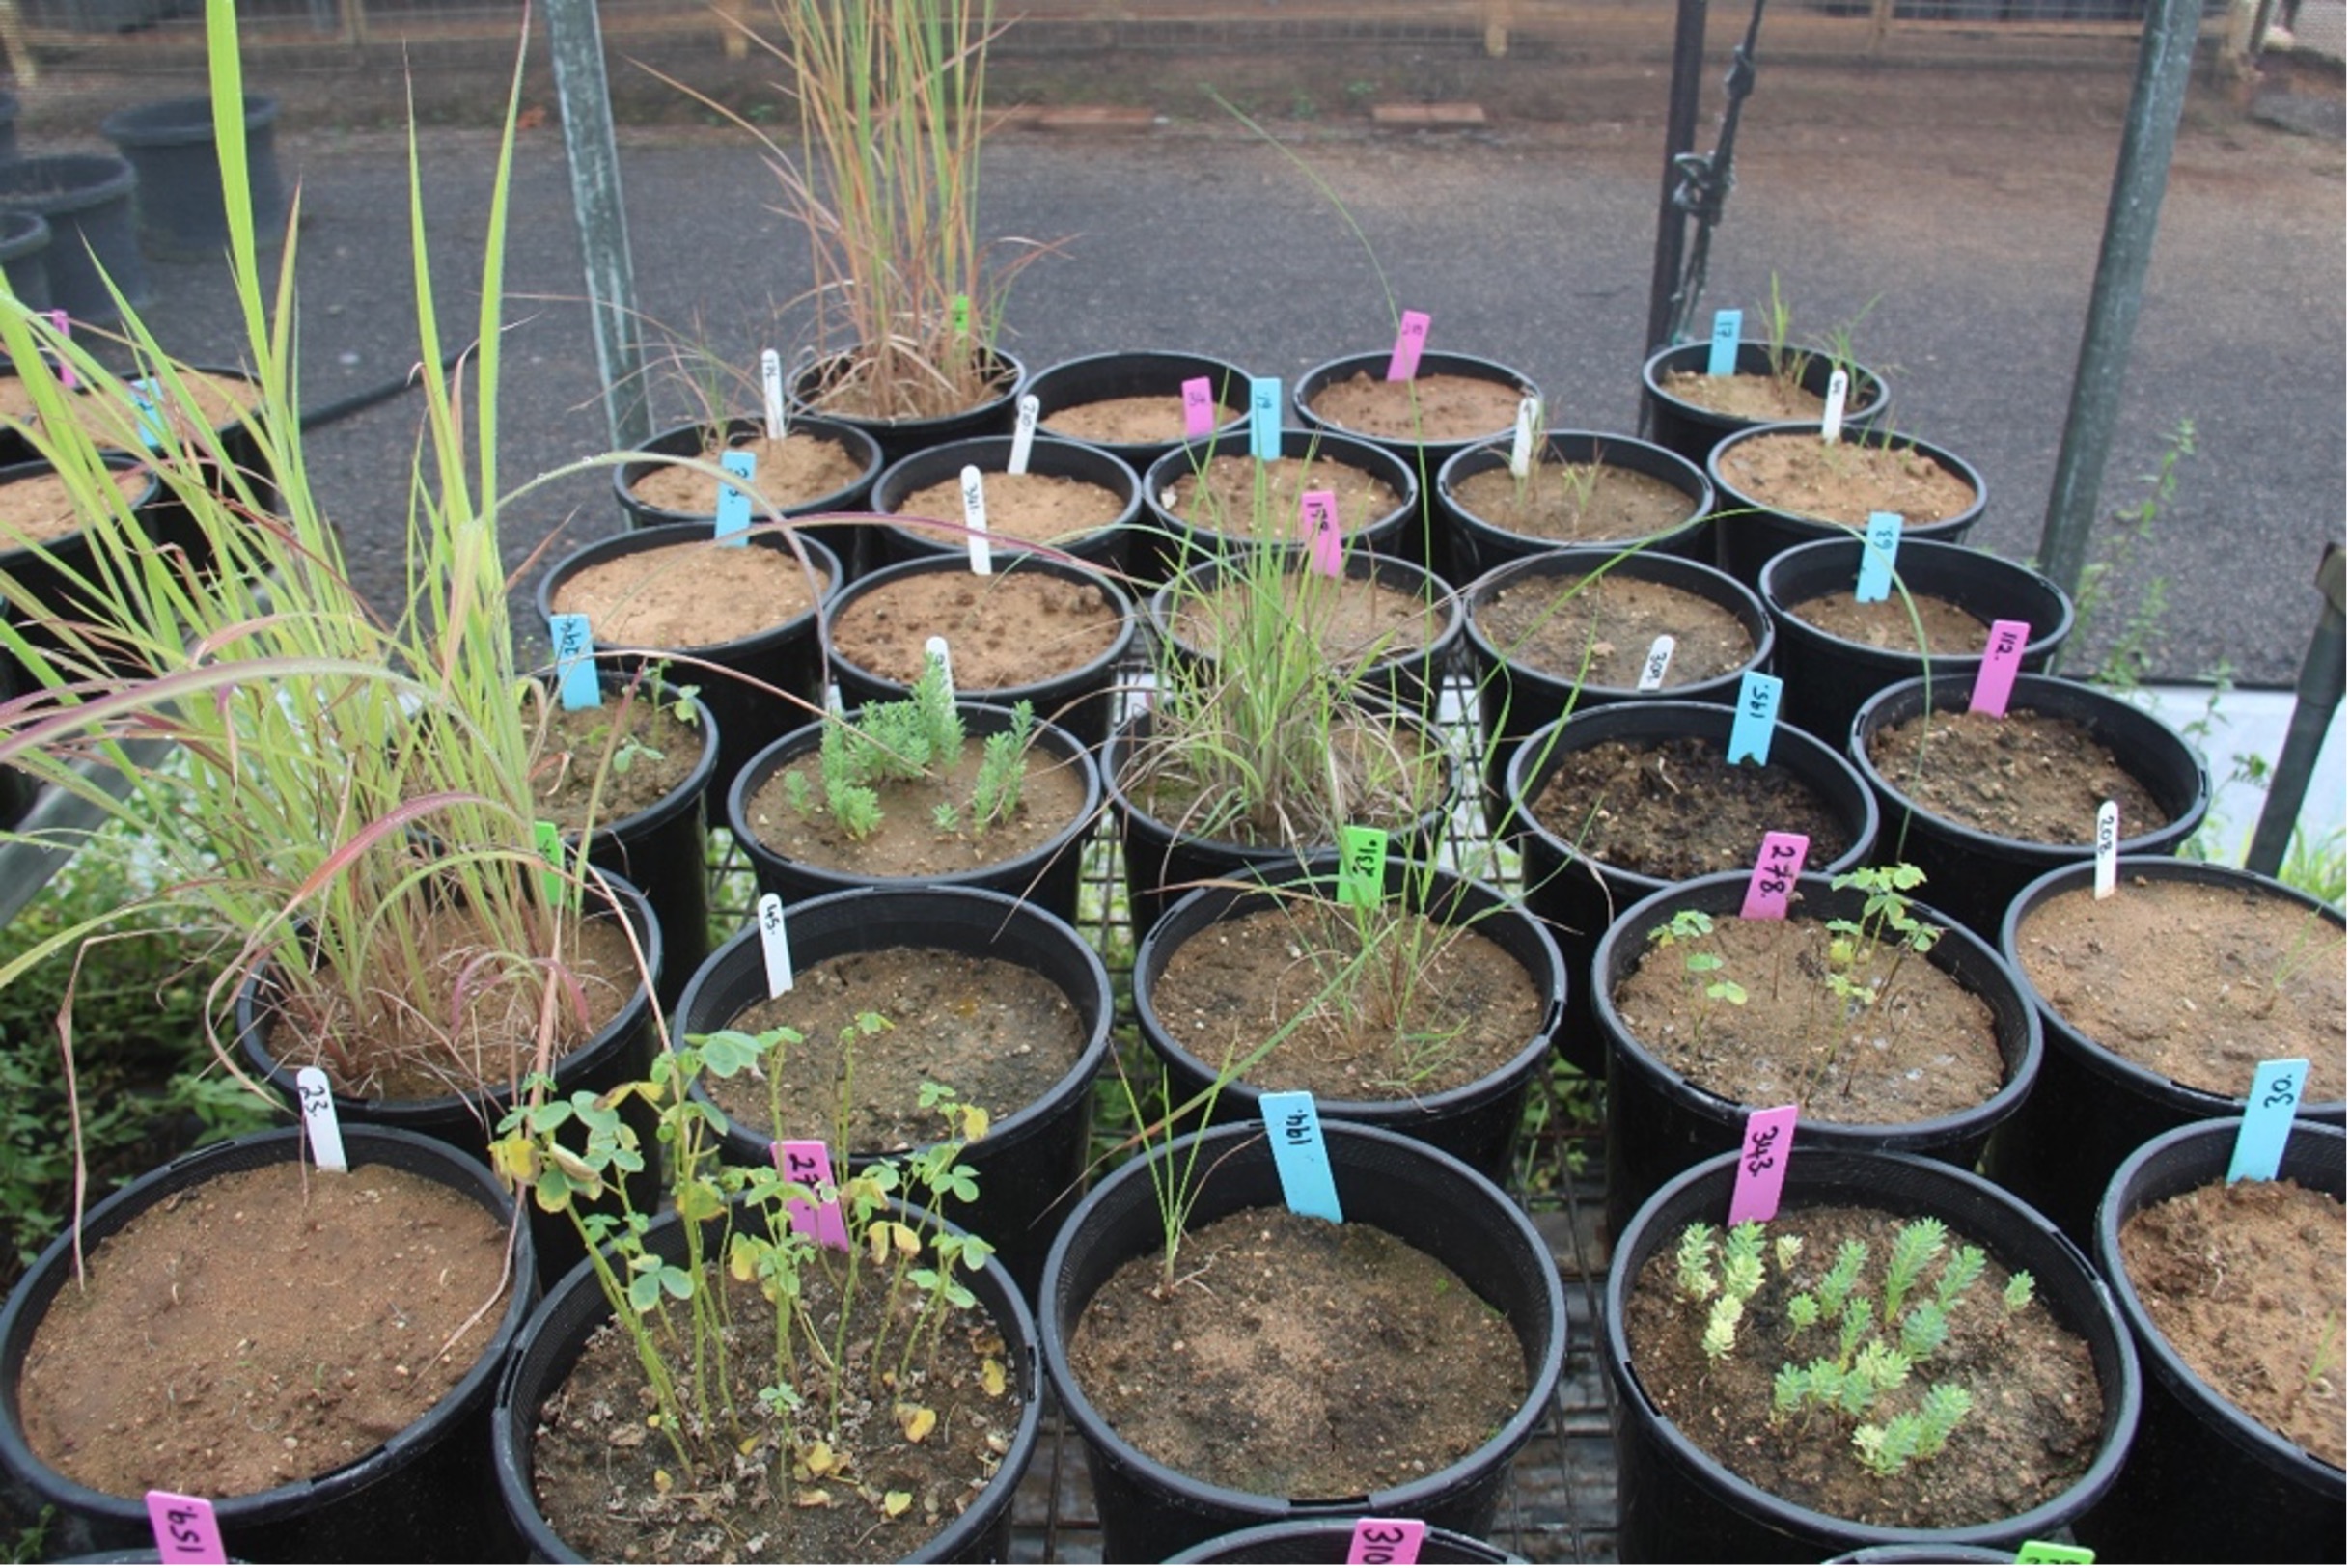 Gamba grass in pot trials 13 weeks after initial treatment